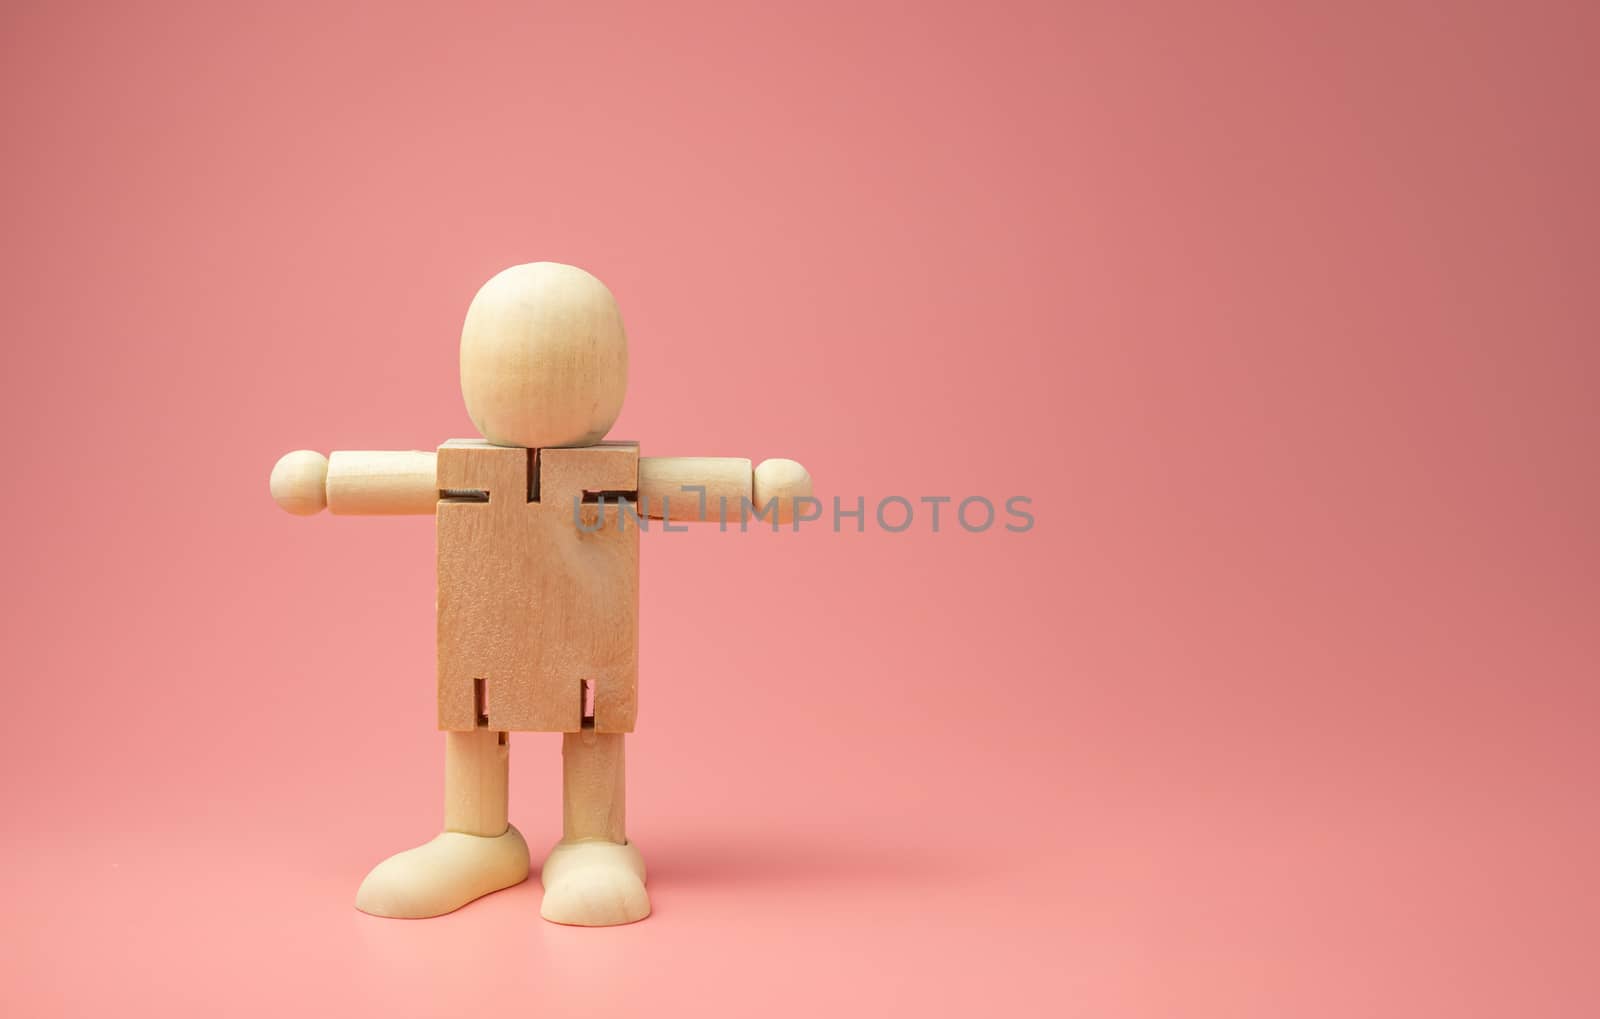 A Wooden doll on pink background. by Unimages2527